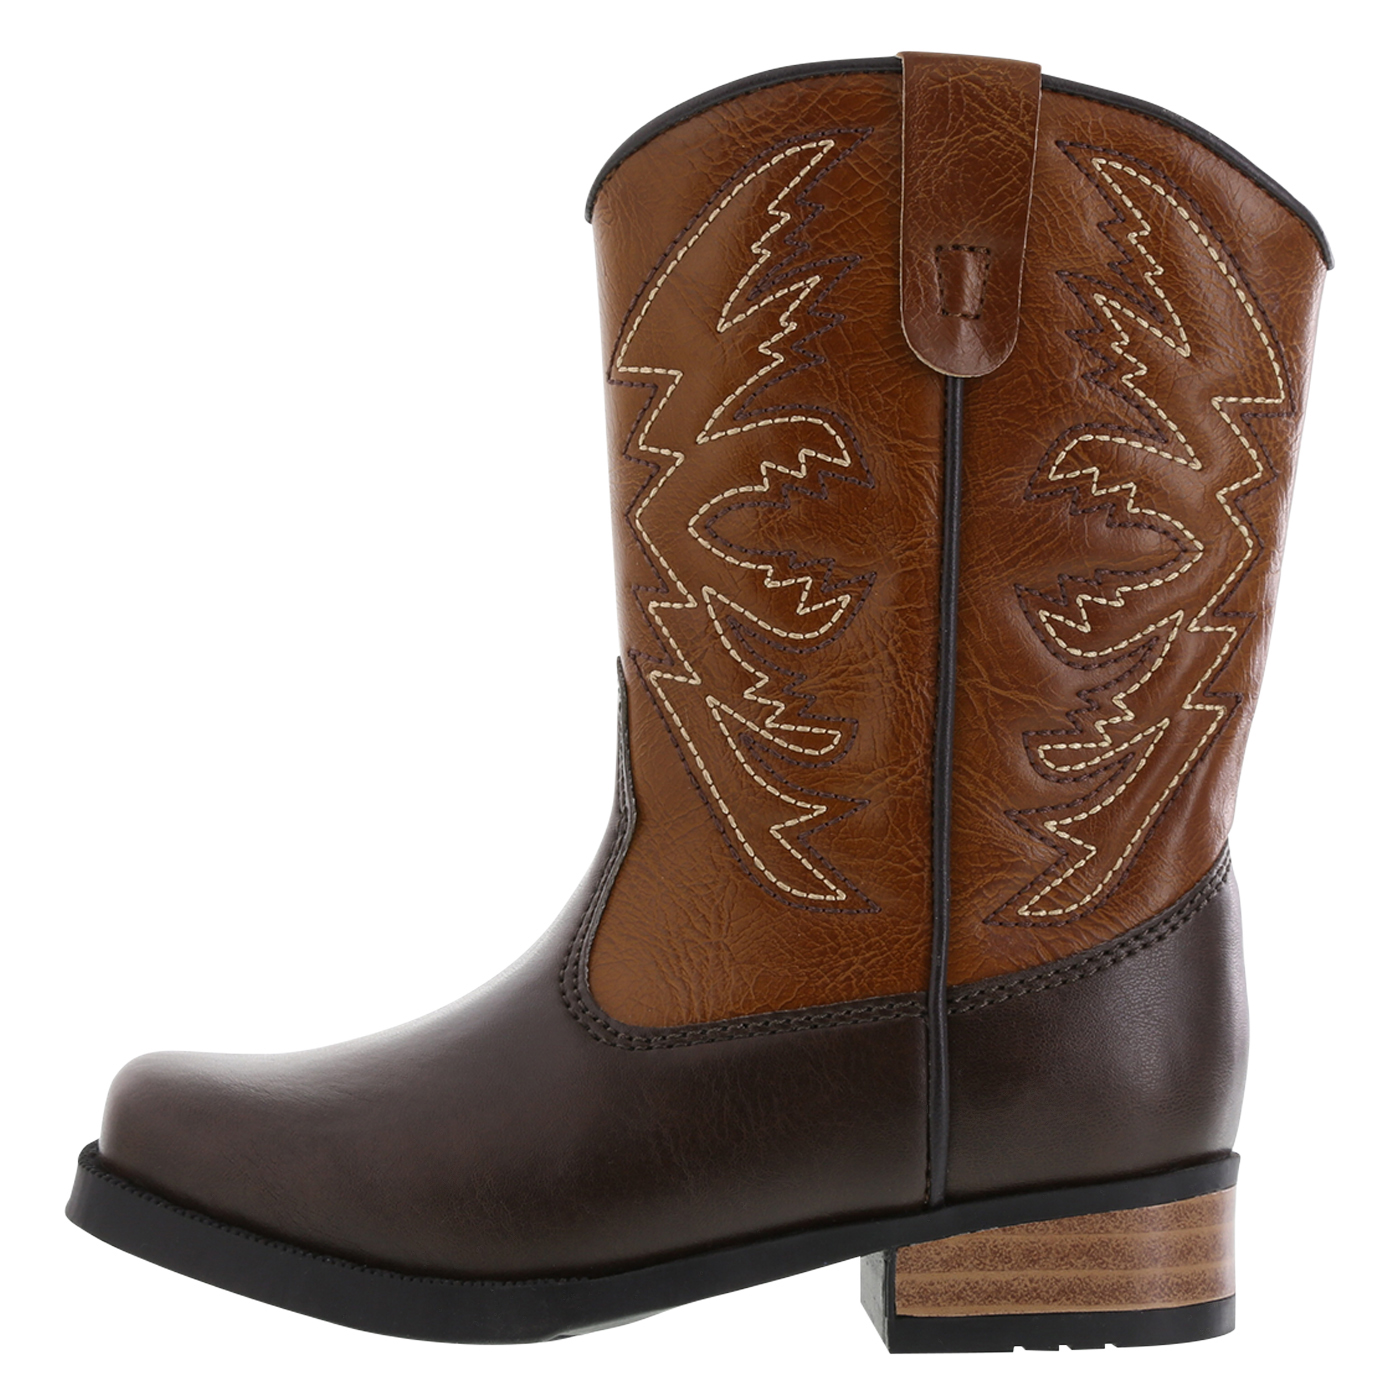 SmartFit Toddler Square-Toe Western Boot | Payless